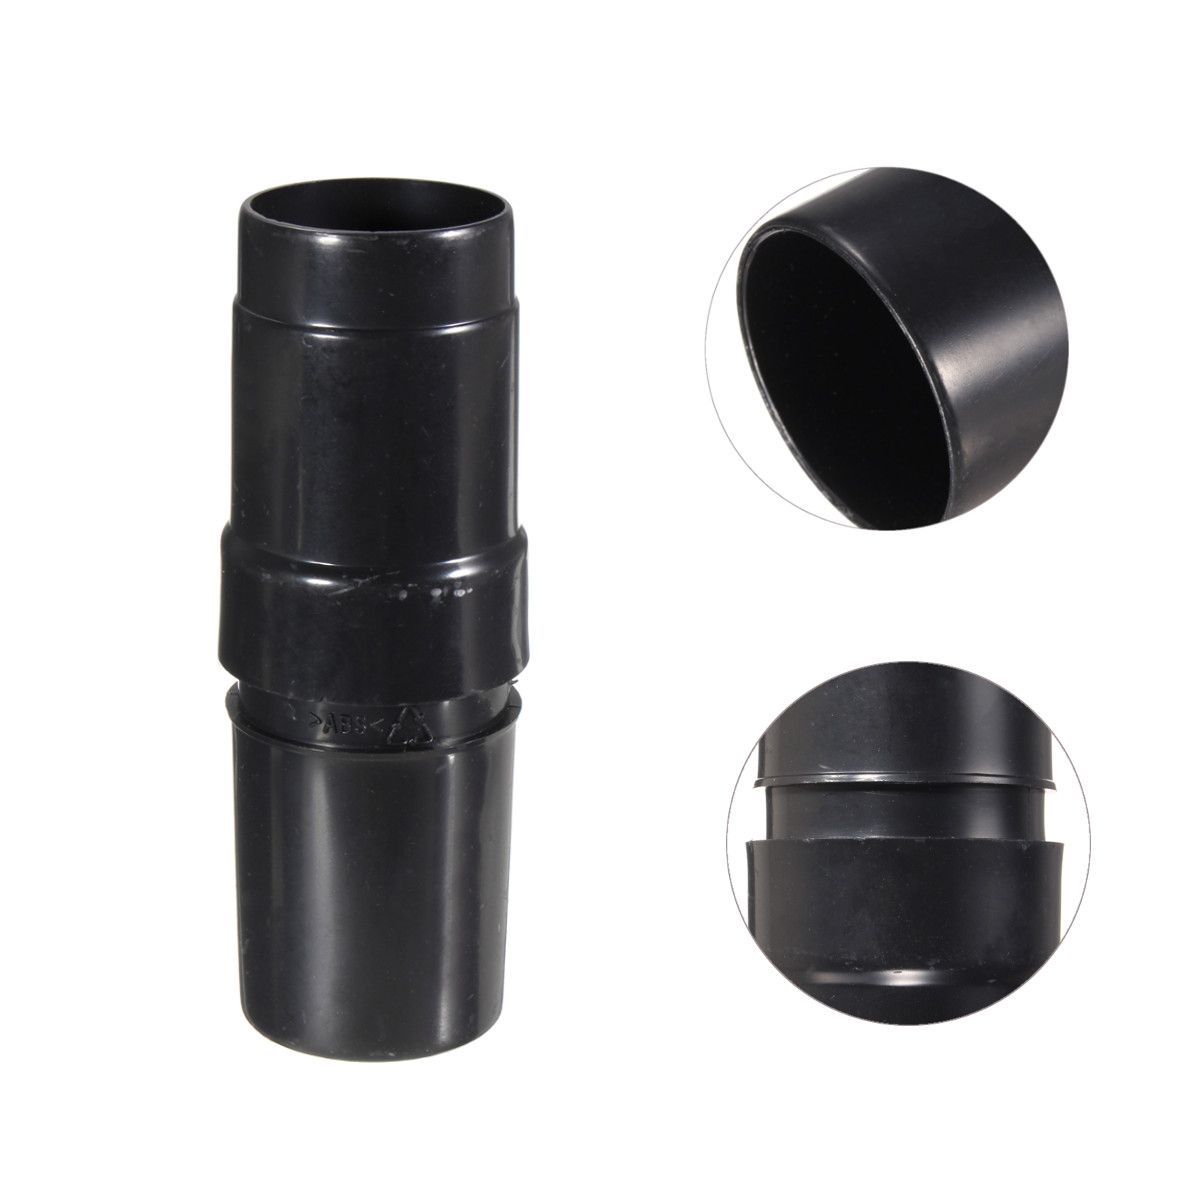 28mm-to-32mm32mm-to-35mm-ABS-Vacuum-Cleaner-Hose-Adapter-Converter-Hoover-1492069